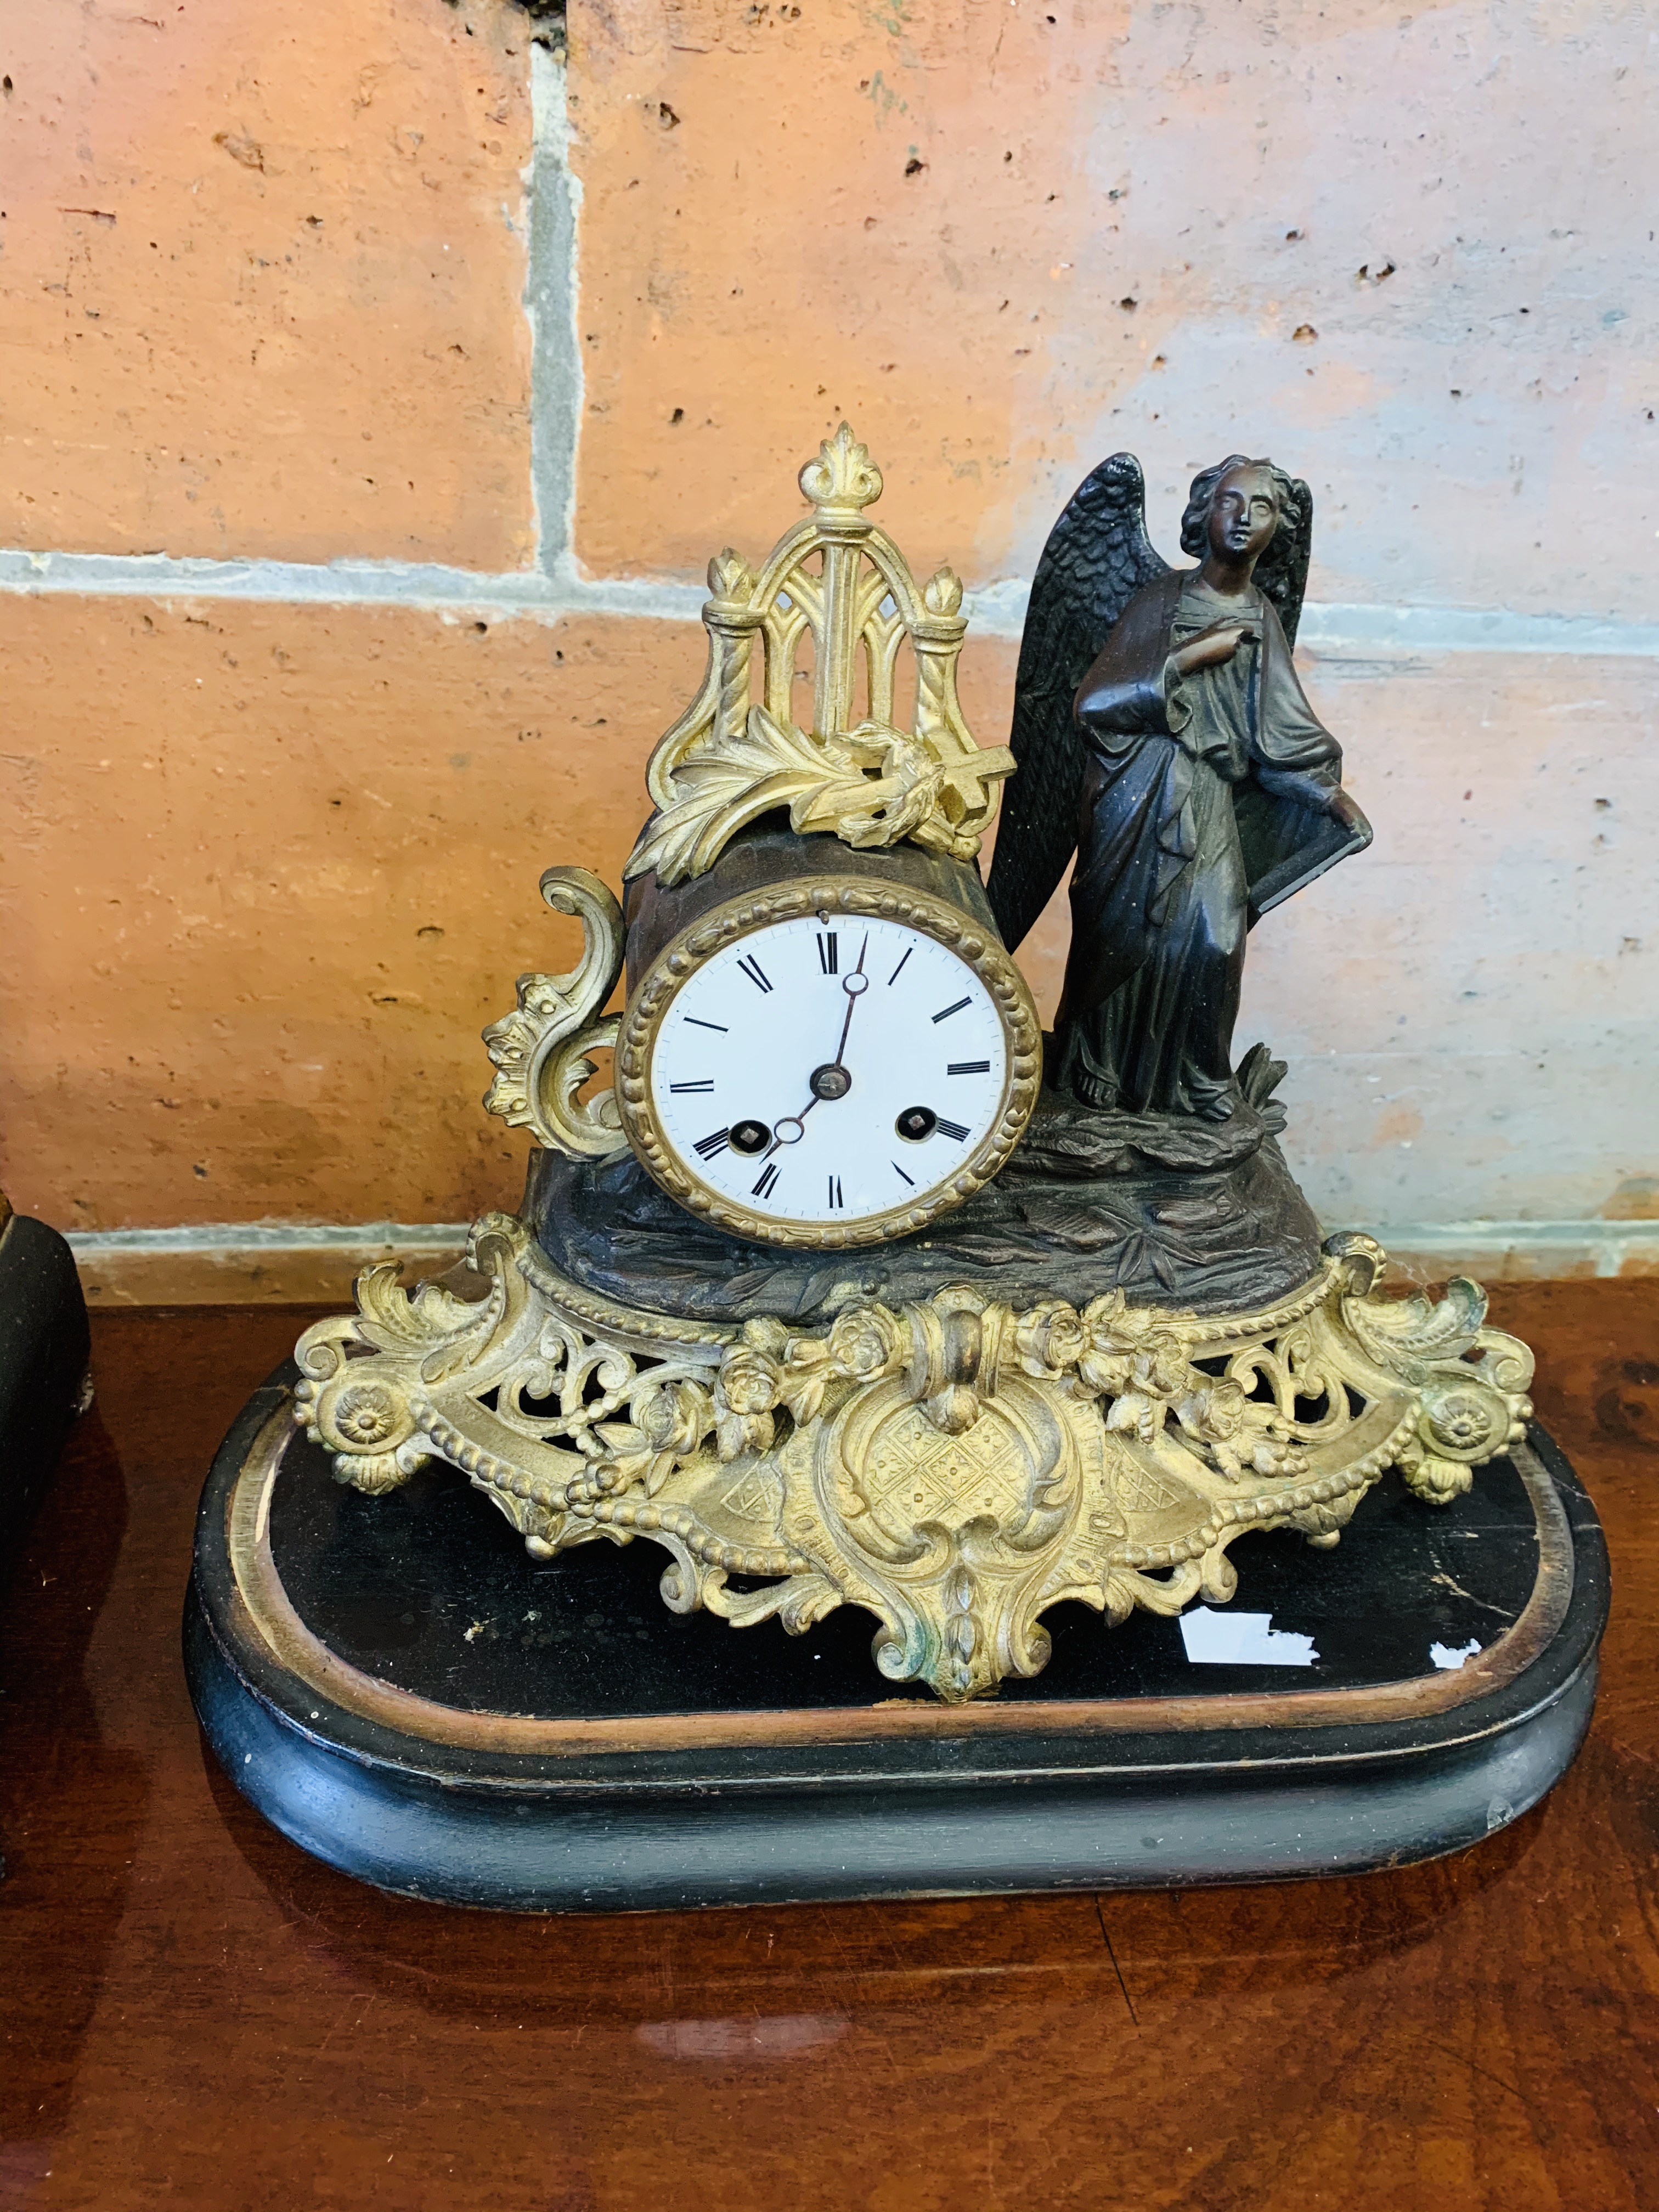 Wood case mantel clock, together with a French-style mantel clock on wood base, no glass on face - Image 2 of 2